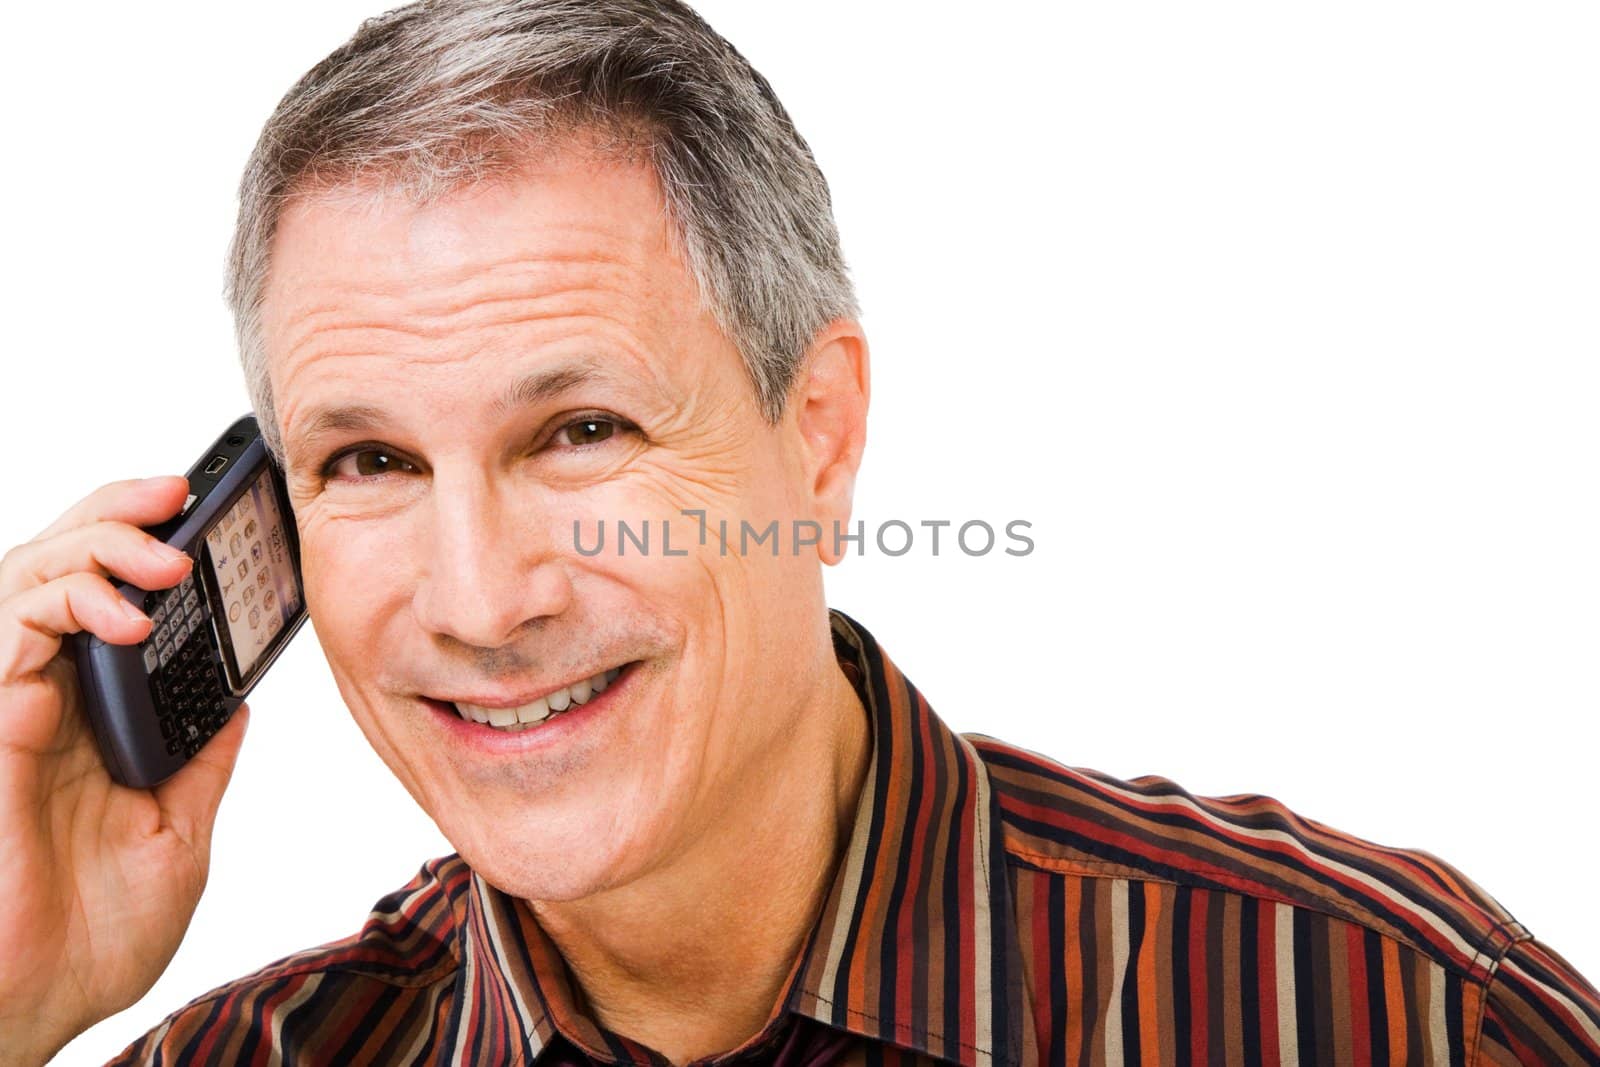 Portrait of a businessman talking on a mobile phone isolated over white